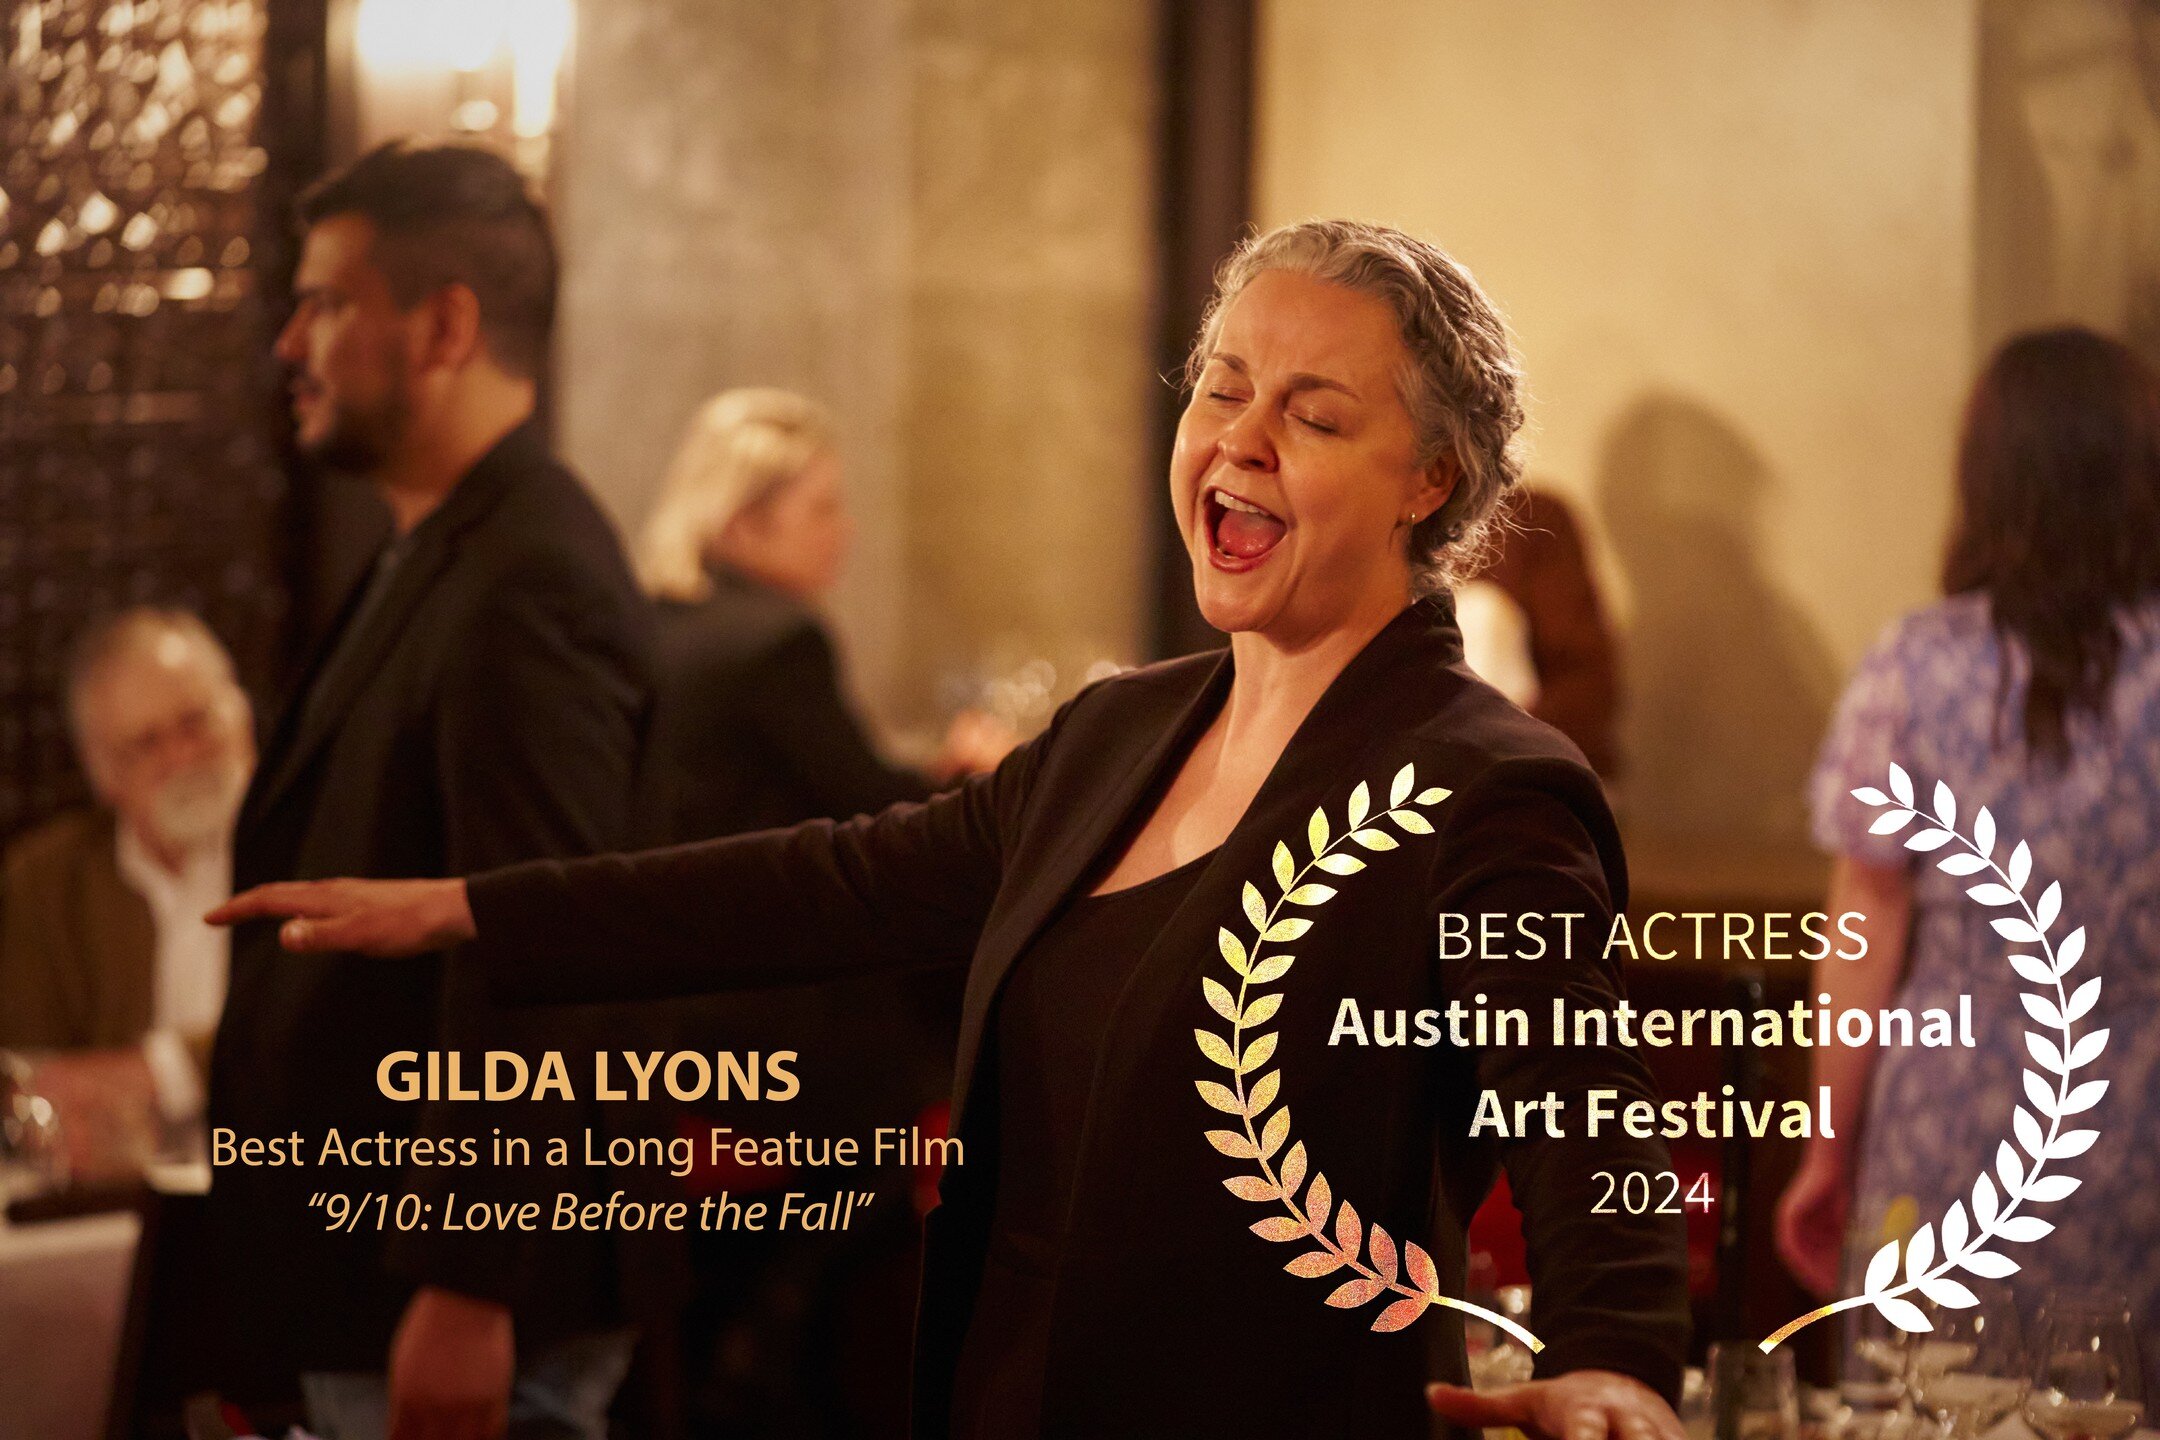 Congratulations @gildalyons on winning Best Actress in a Long Feature Film for your performance in our #operafilm from the Austin International Art Festival. So richly-deserved. @encompassarts @theharttschool @hartt.composition @ascap @daronhagencomp